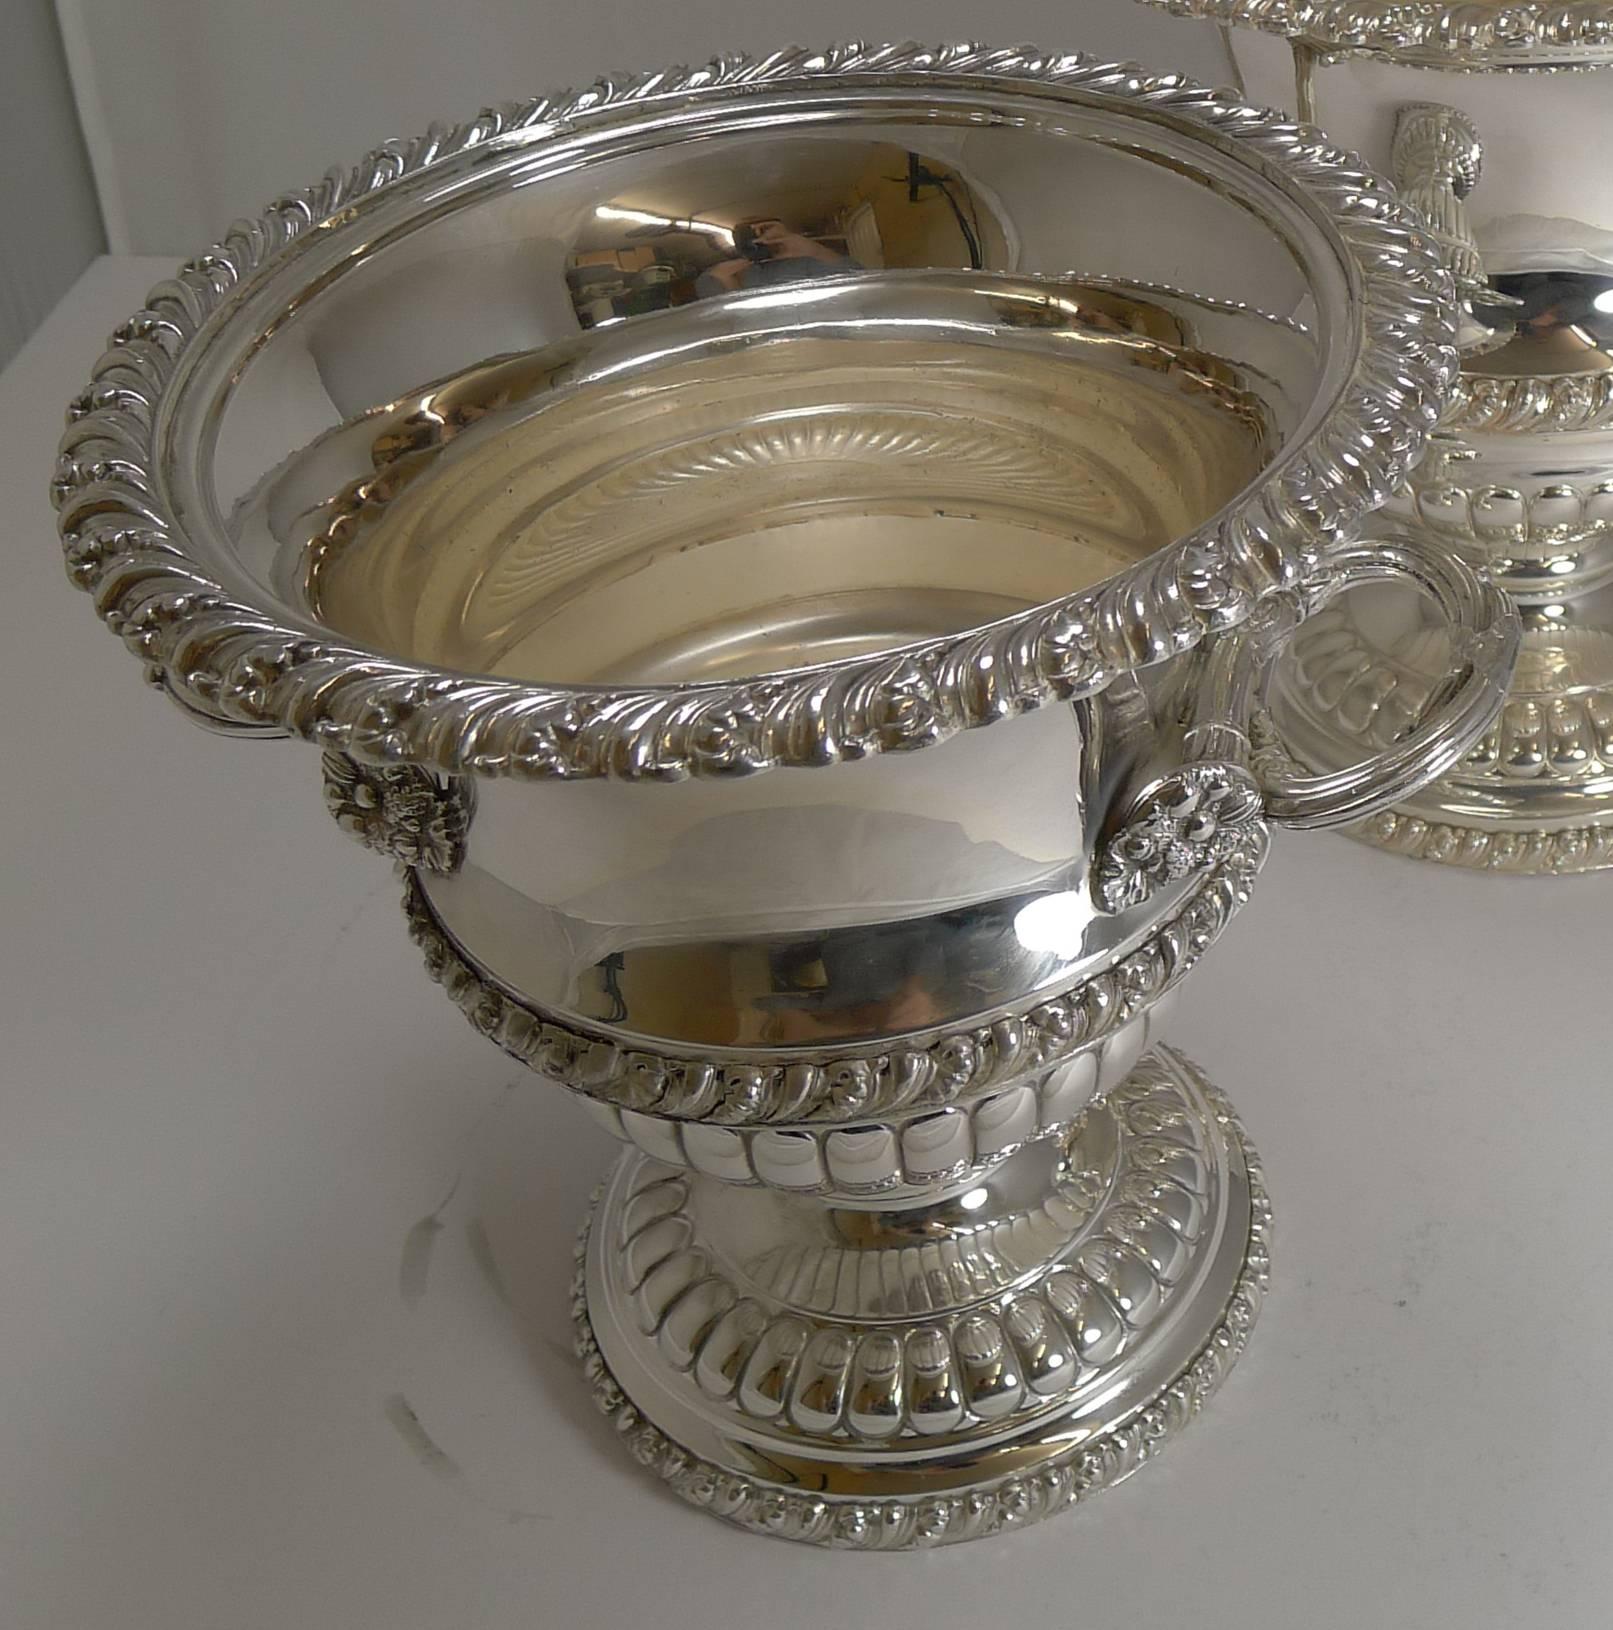 Early 20th Century Pair of Antique English Silver Plated Wine or Champagne Coolers, circa 1900